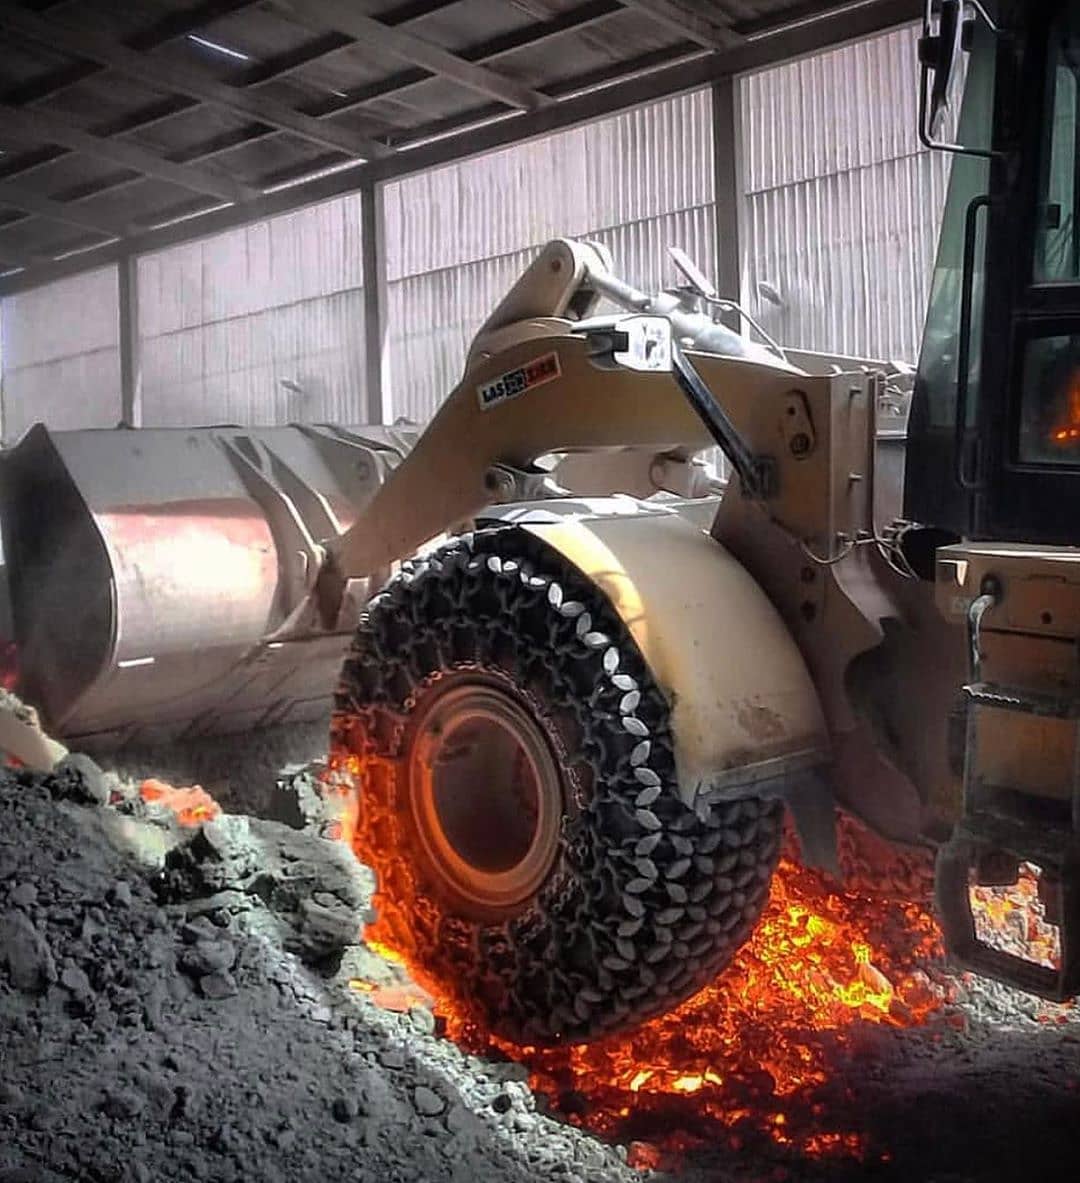 Specialized tires used in the extreme heat of steel mills.